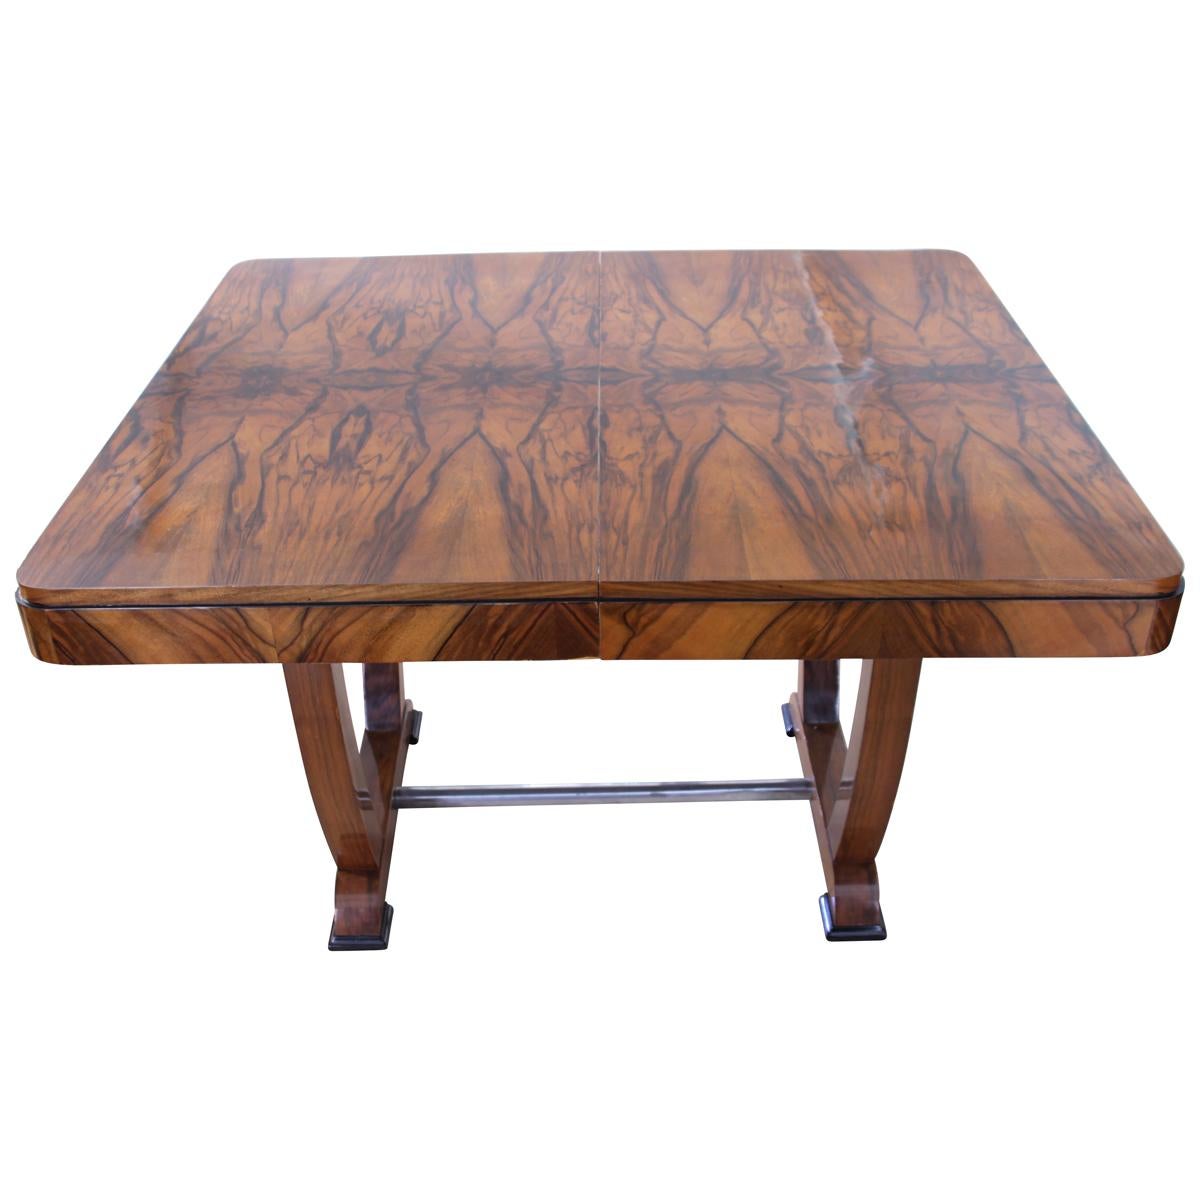 Expandable Art Deco Dining Room Table in Walnut Veneer from France circa 1930.

The table has a stunnin book-matched walnut veneer on the plates, that has been finely hand-polished with shellac (French polished). 
The sides of the plate and the leg